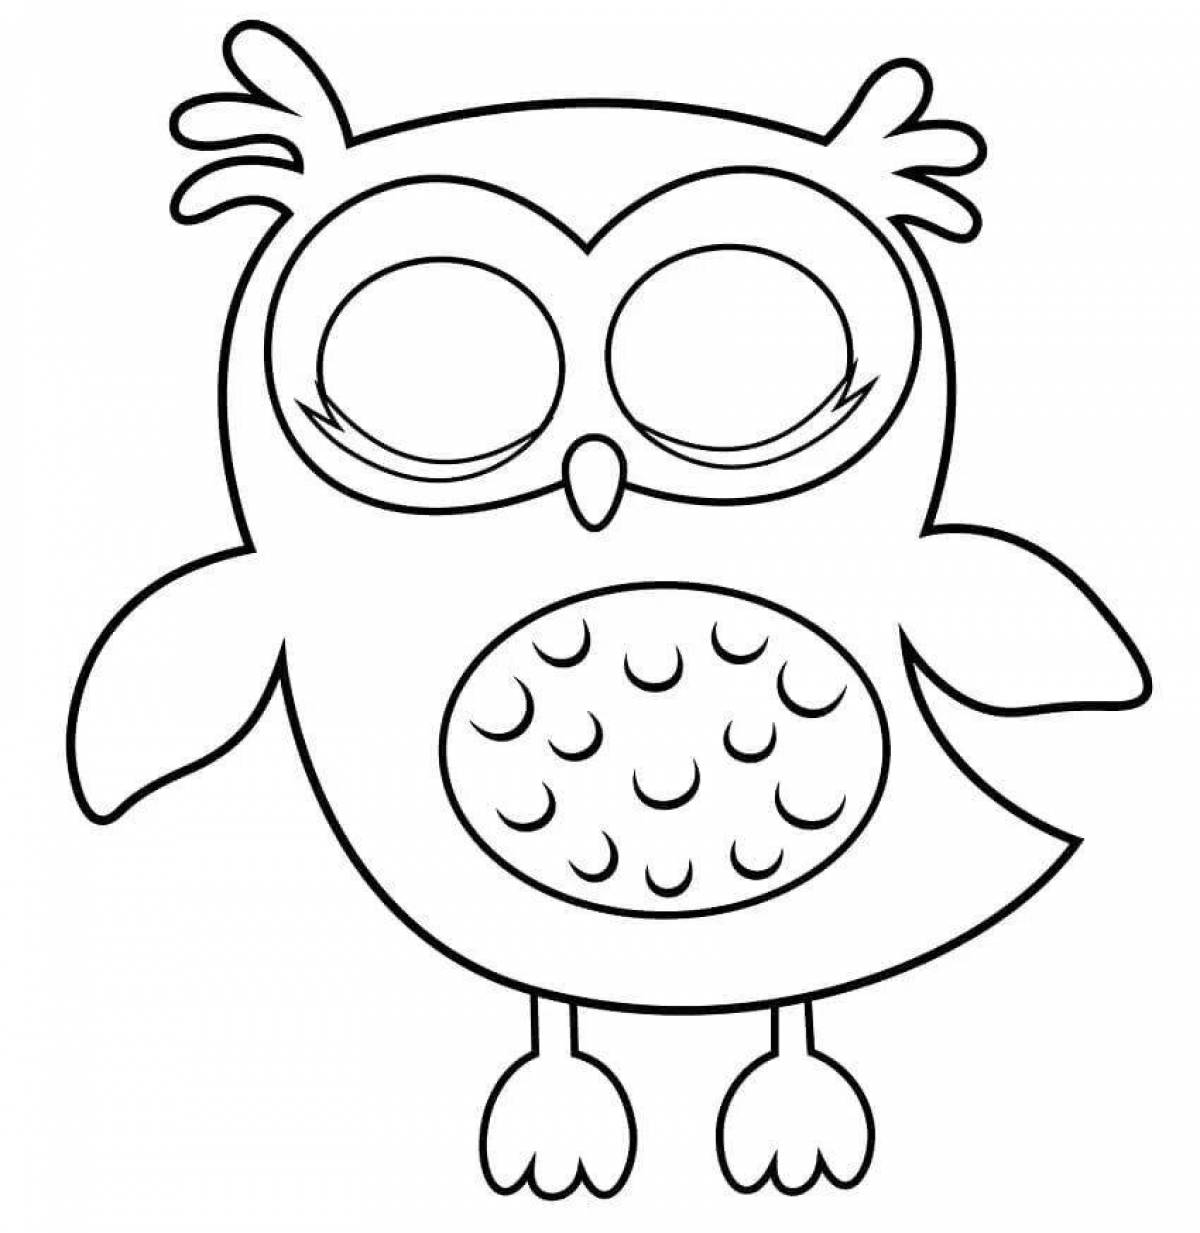 Hip-hop owlet coloring page